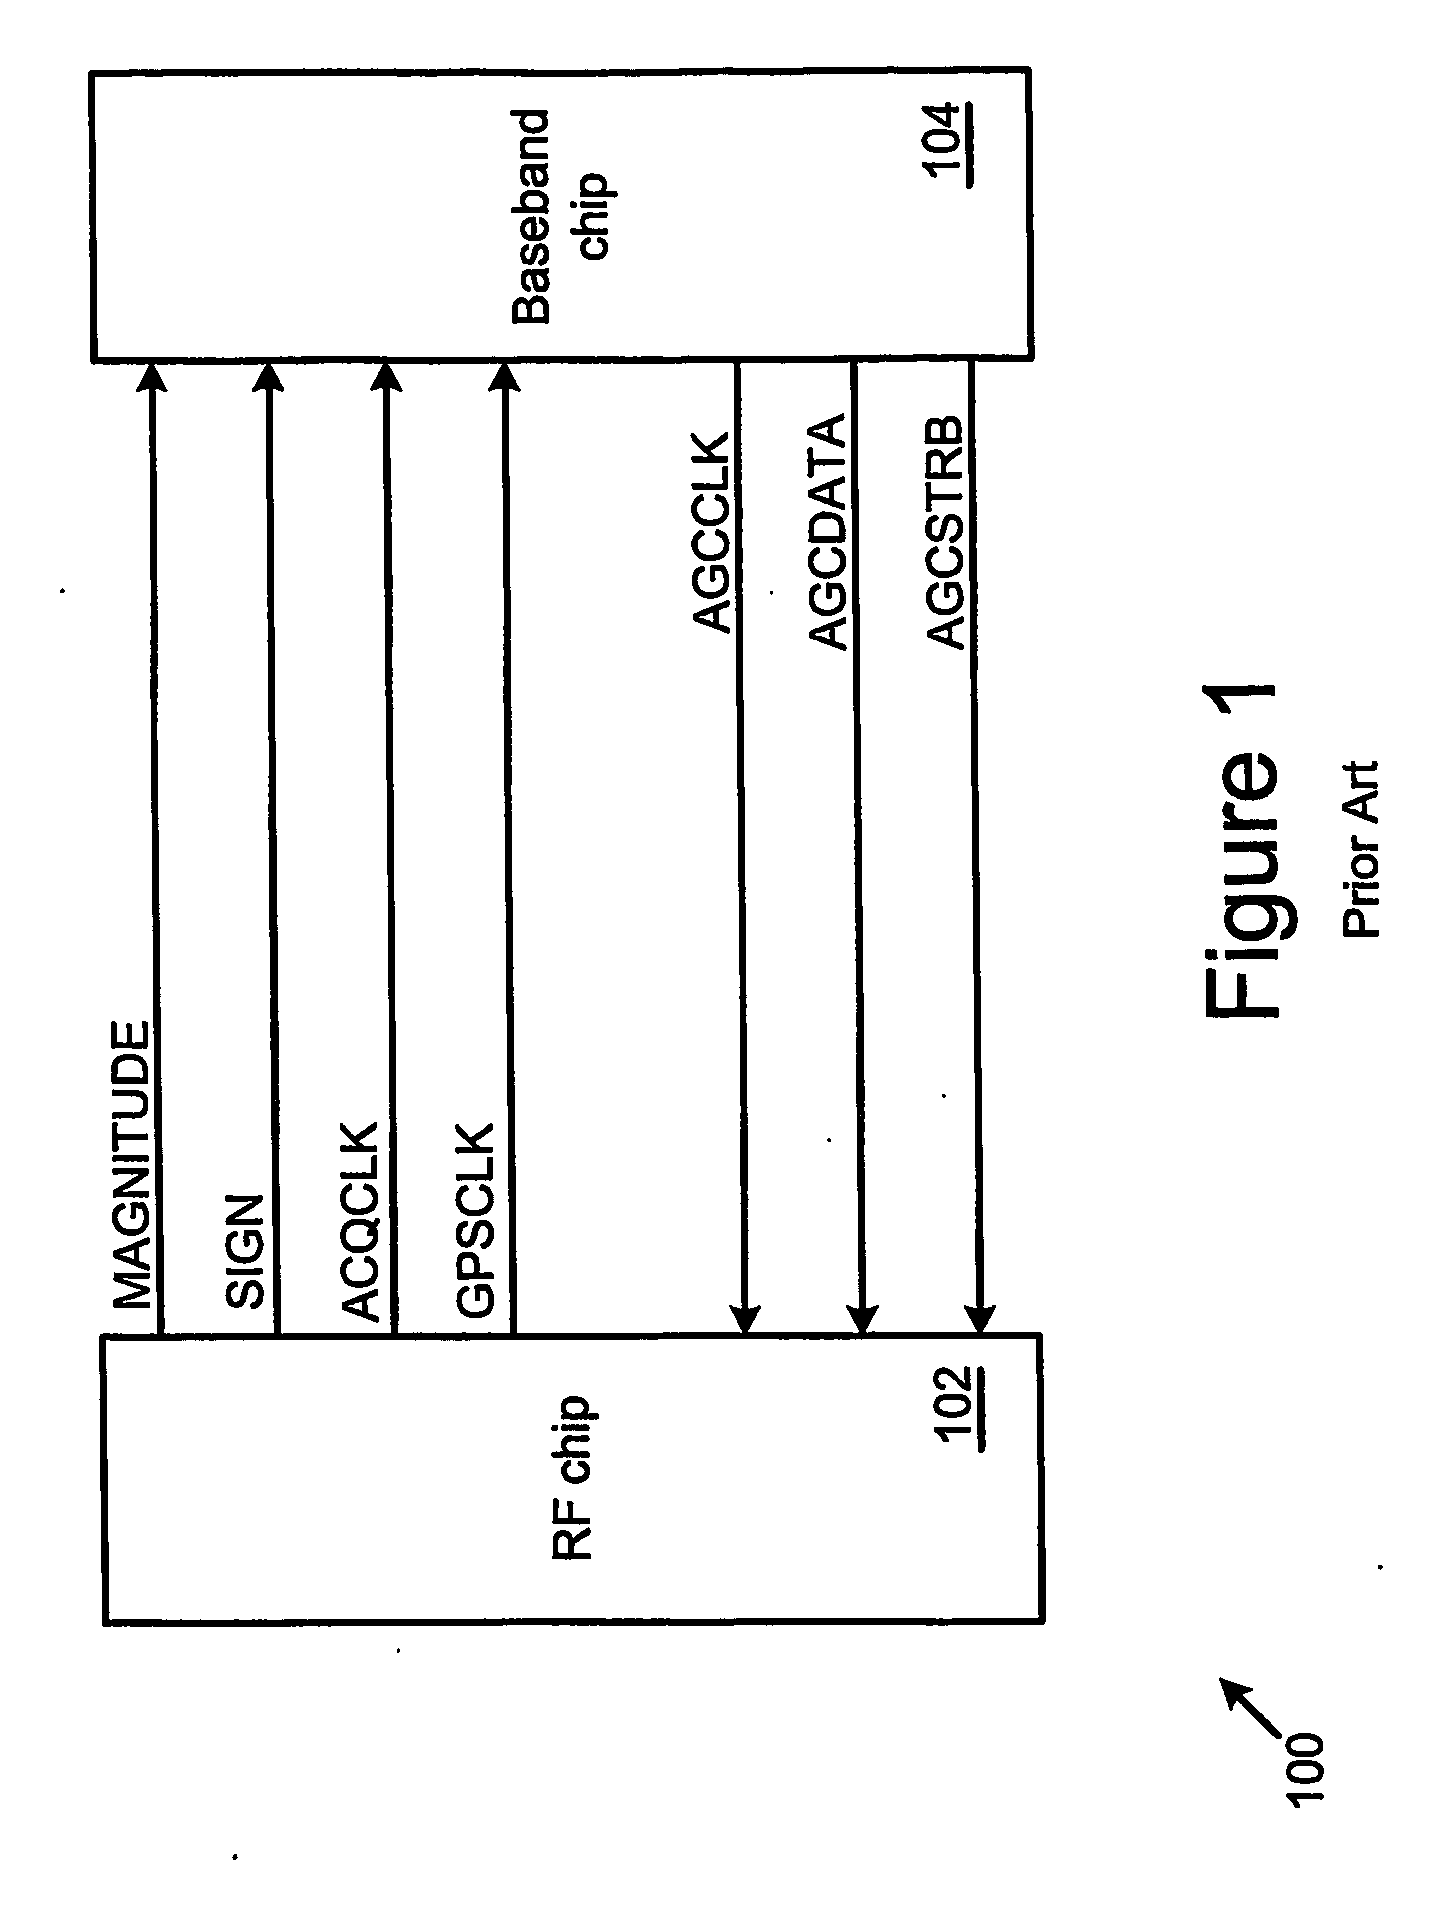 Serial radio frequency to baseband interface with programmable clock